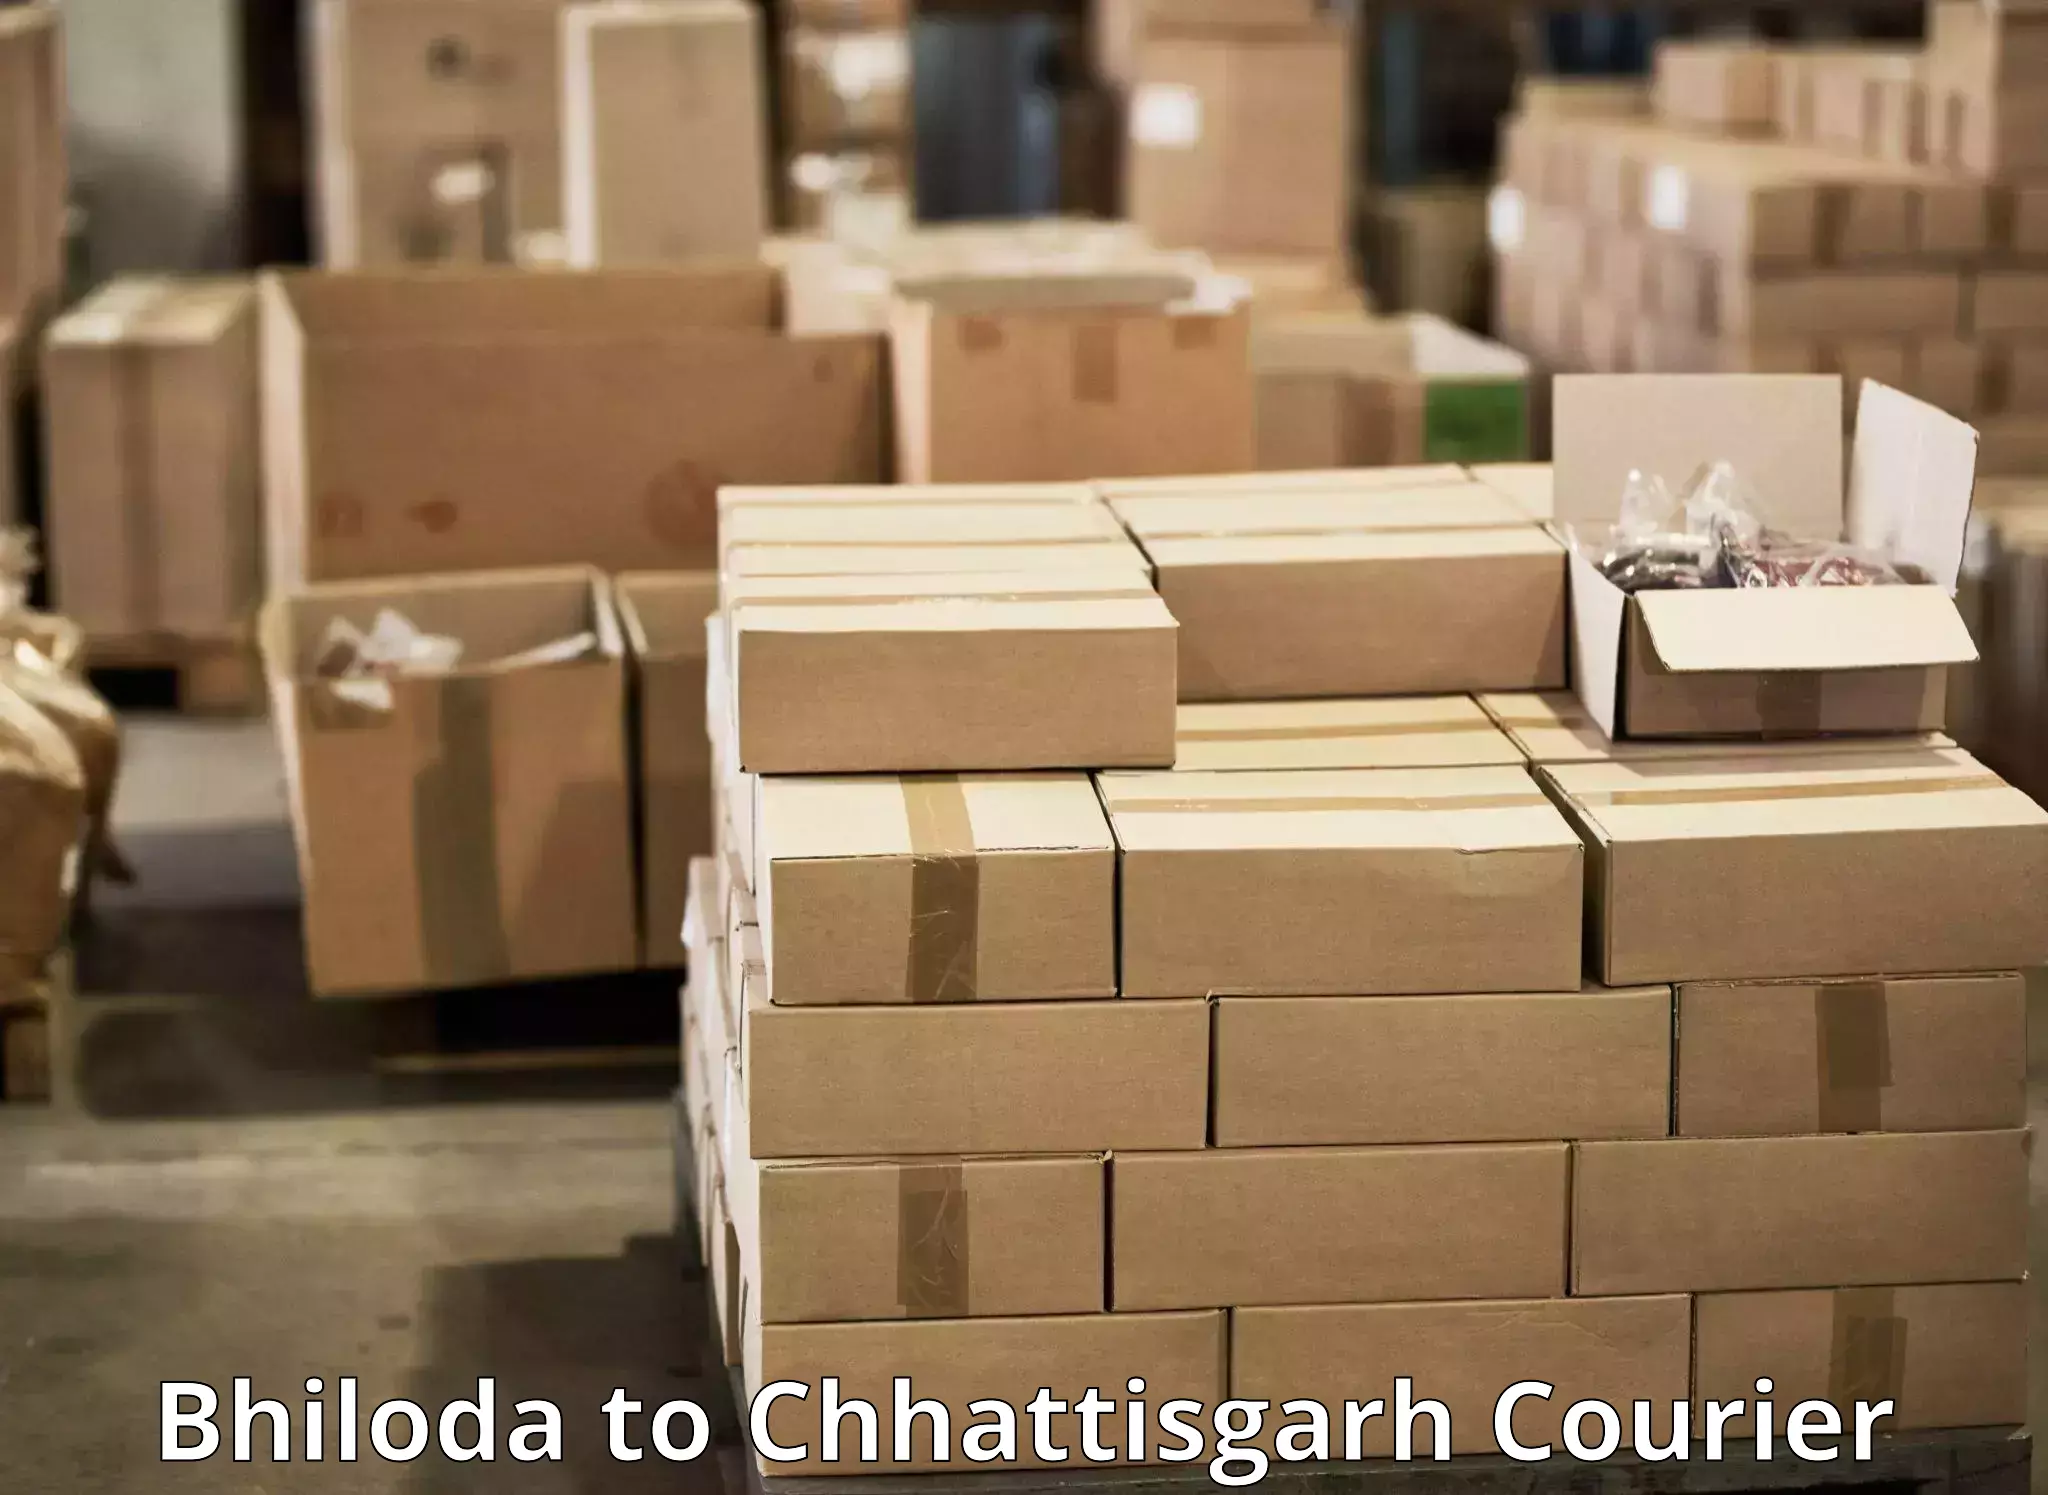 On-demand shipping options Bhiloda to bagbahra